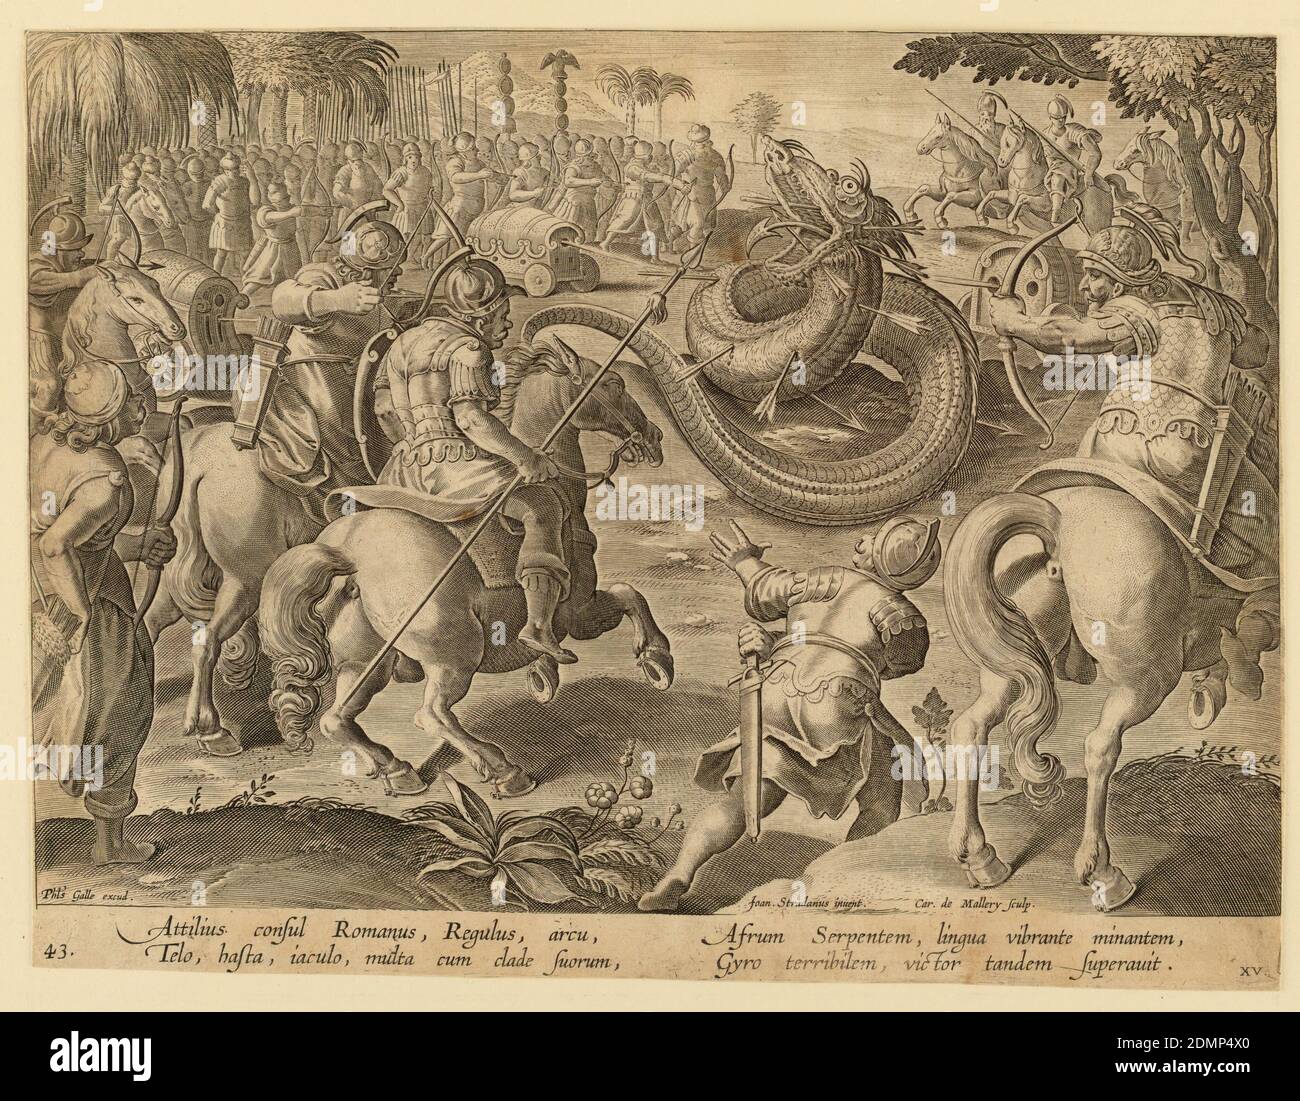 The Roman Consul Attilius Regulus Fighting a Giant African Serpent, plate 25 in the Venationes Ferarum series, Jan van der Straet, called Stradanus, Flemish, 1523–1605, Karel van Mallery, Philips Galle, Flemish, 1537 - 1612, Engraving on paper, Horizontal rectangle. The serpent is in the center of the composition, middle ground, surrounded by foot-soldiers and horsemen firing cannon and arrows at him. At lower left: 'Phls Galle excud.'; near lower right: 'Joan Stradanus inuent. / Car. de Mallery Sculp.' Below: 'ATTILIUS CONSUL ROMANUS.', Netherlands, 1596 or after, figures, Print Stock Photo